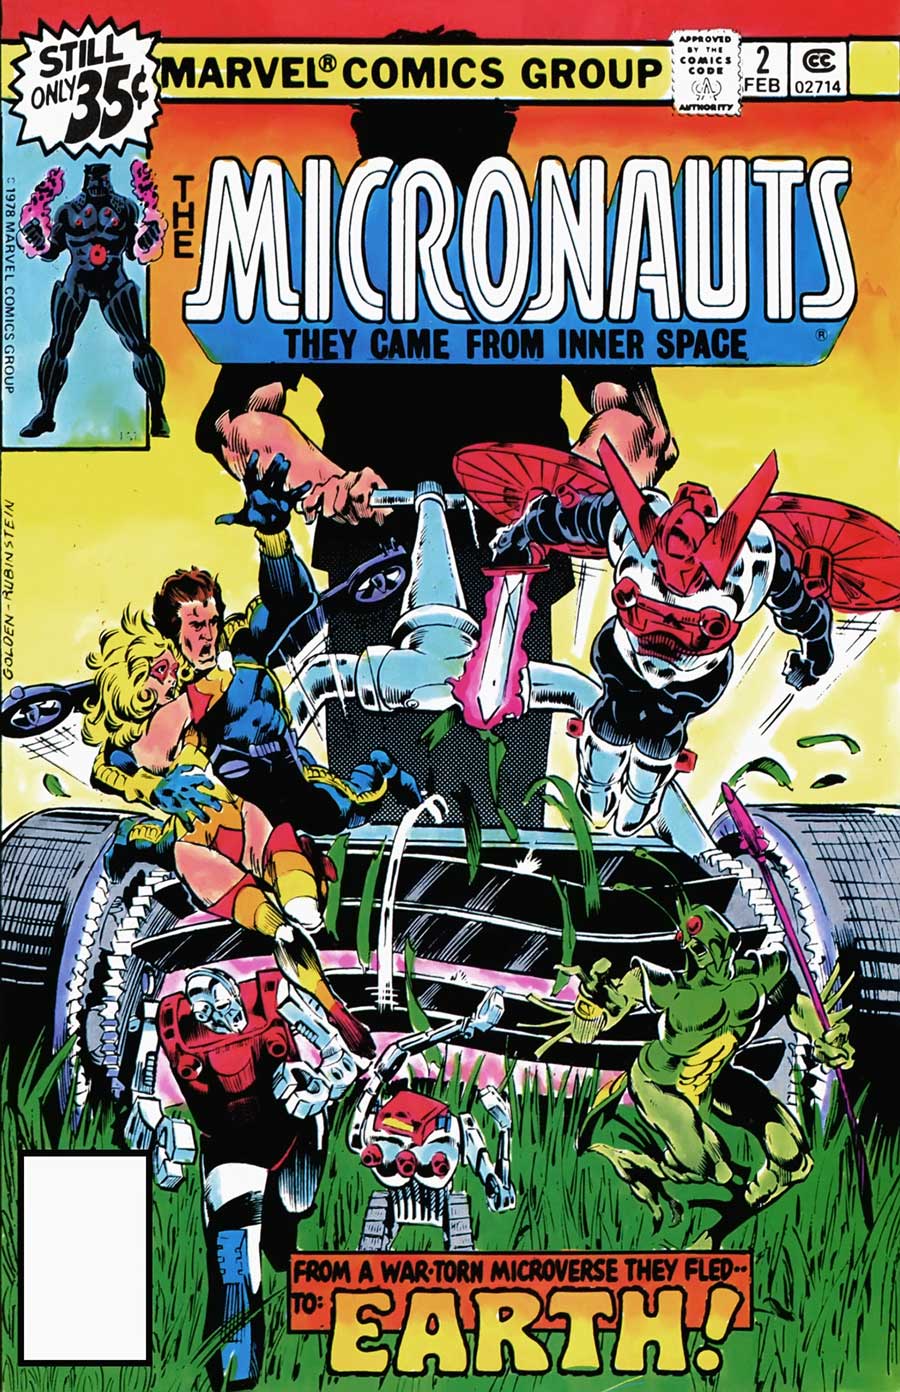 Micronauts #2 by Bill Mantlo and Michael Golden